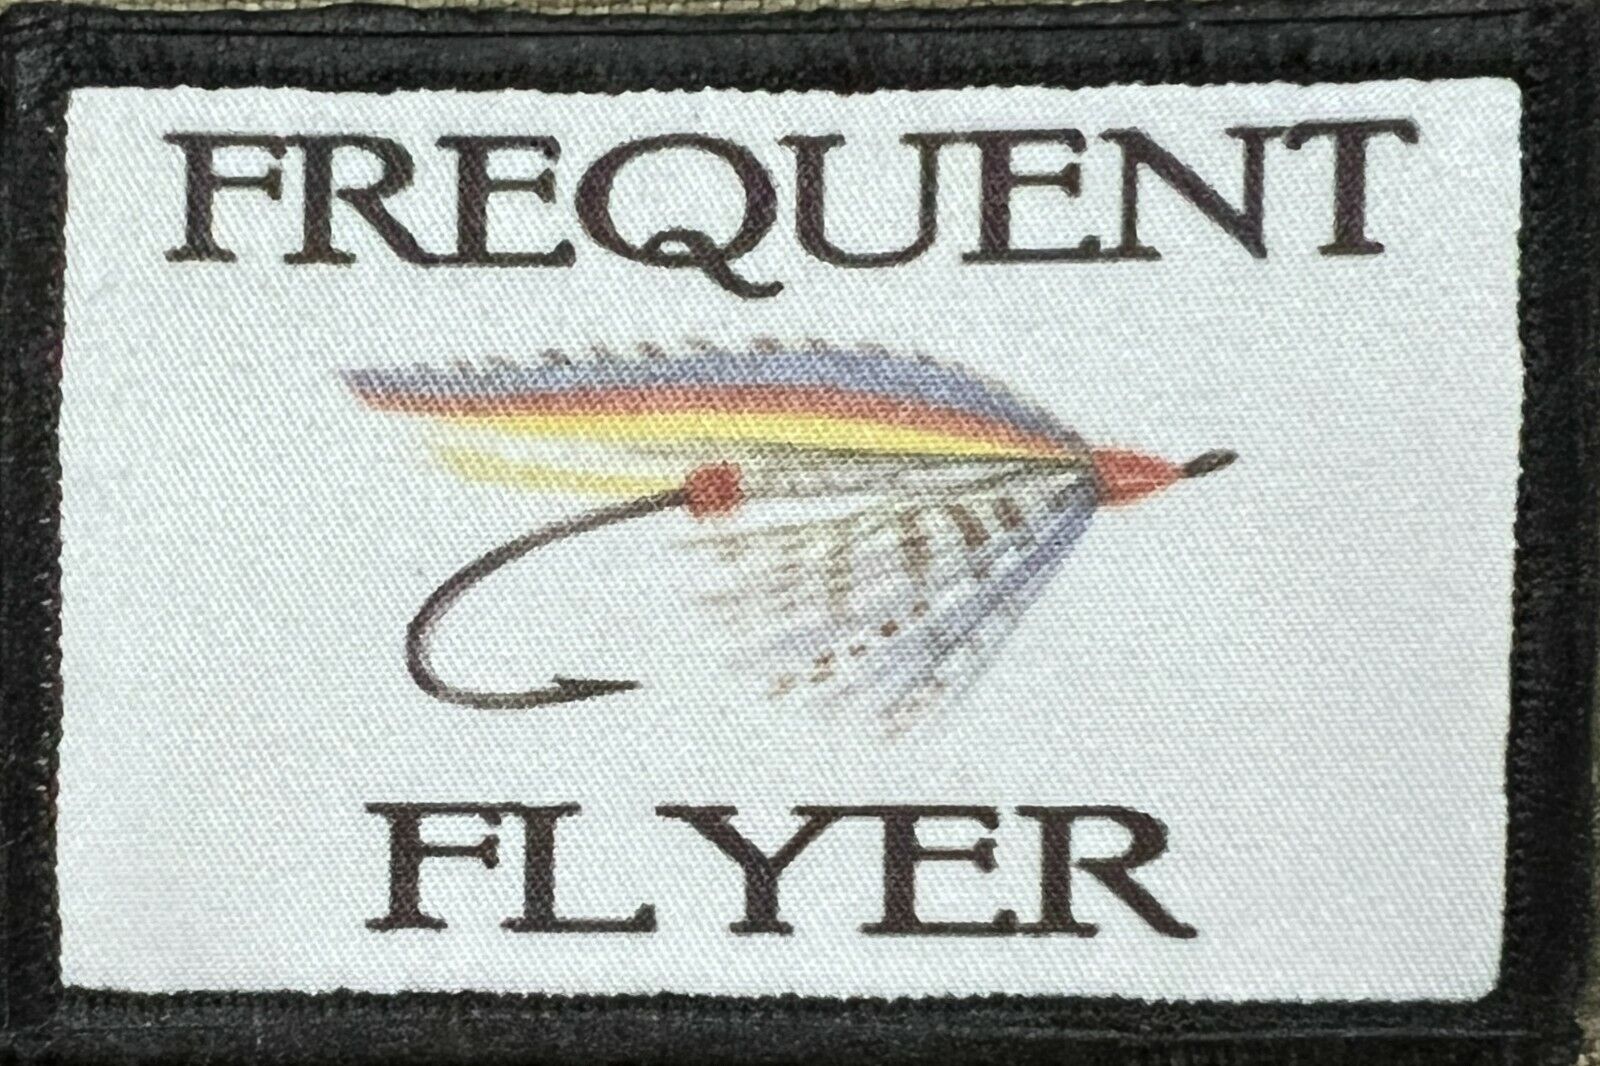 Frequent Flyer Fishing Morale Patch Tactical Military Army USA Fisherman